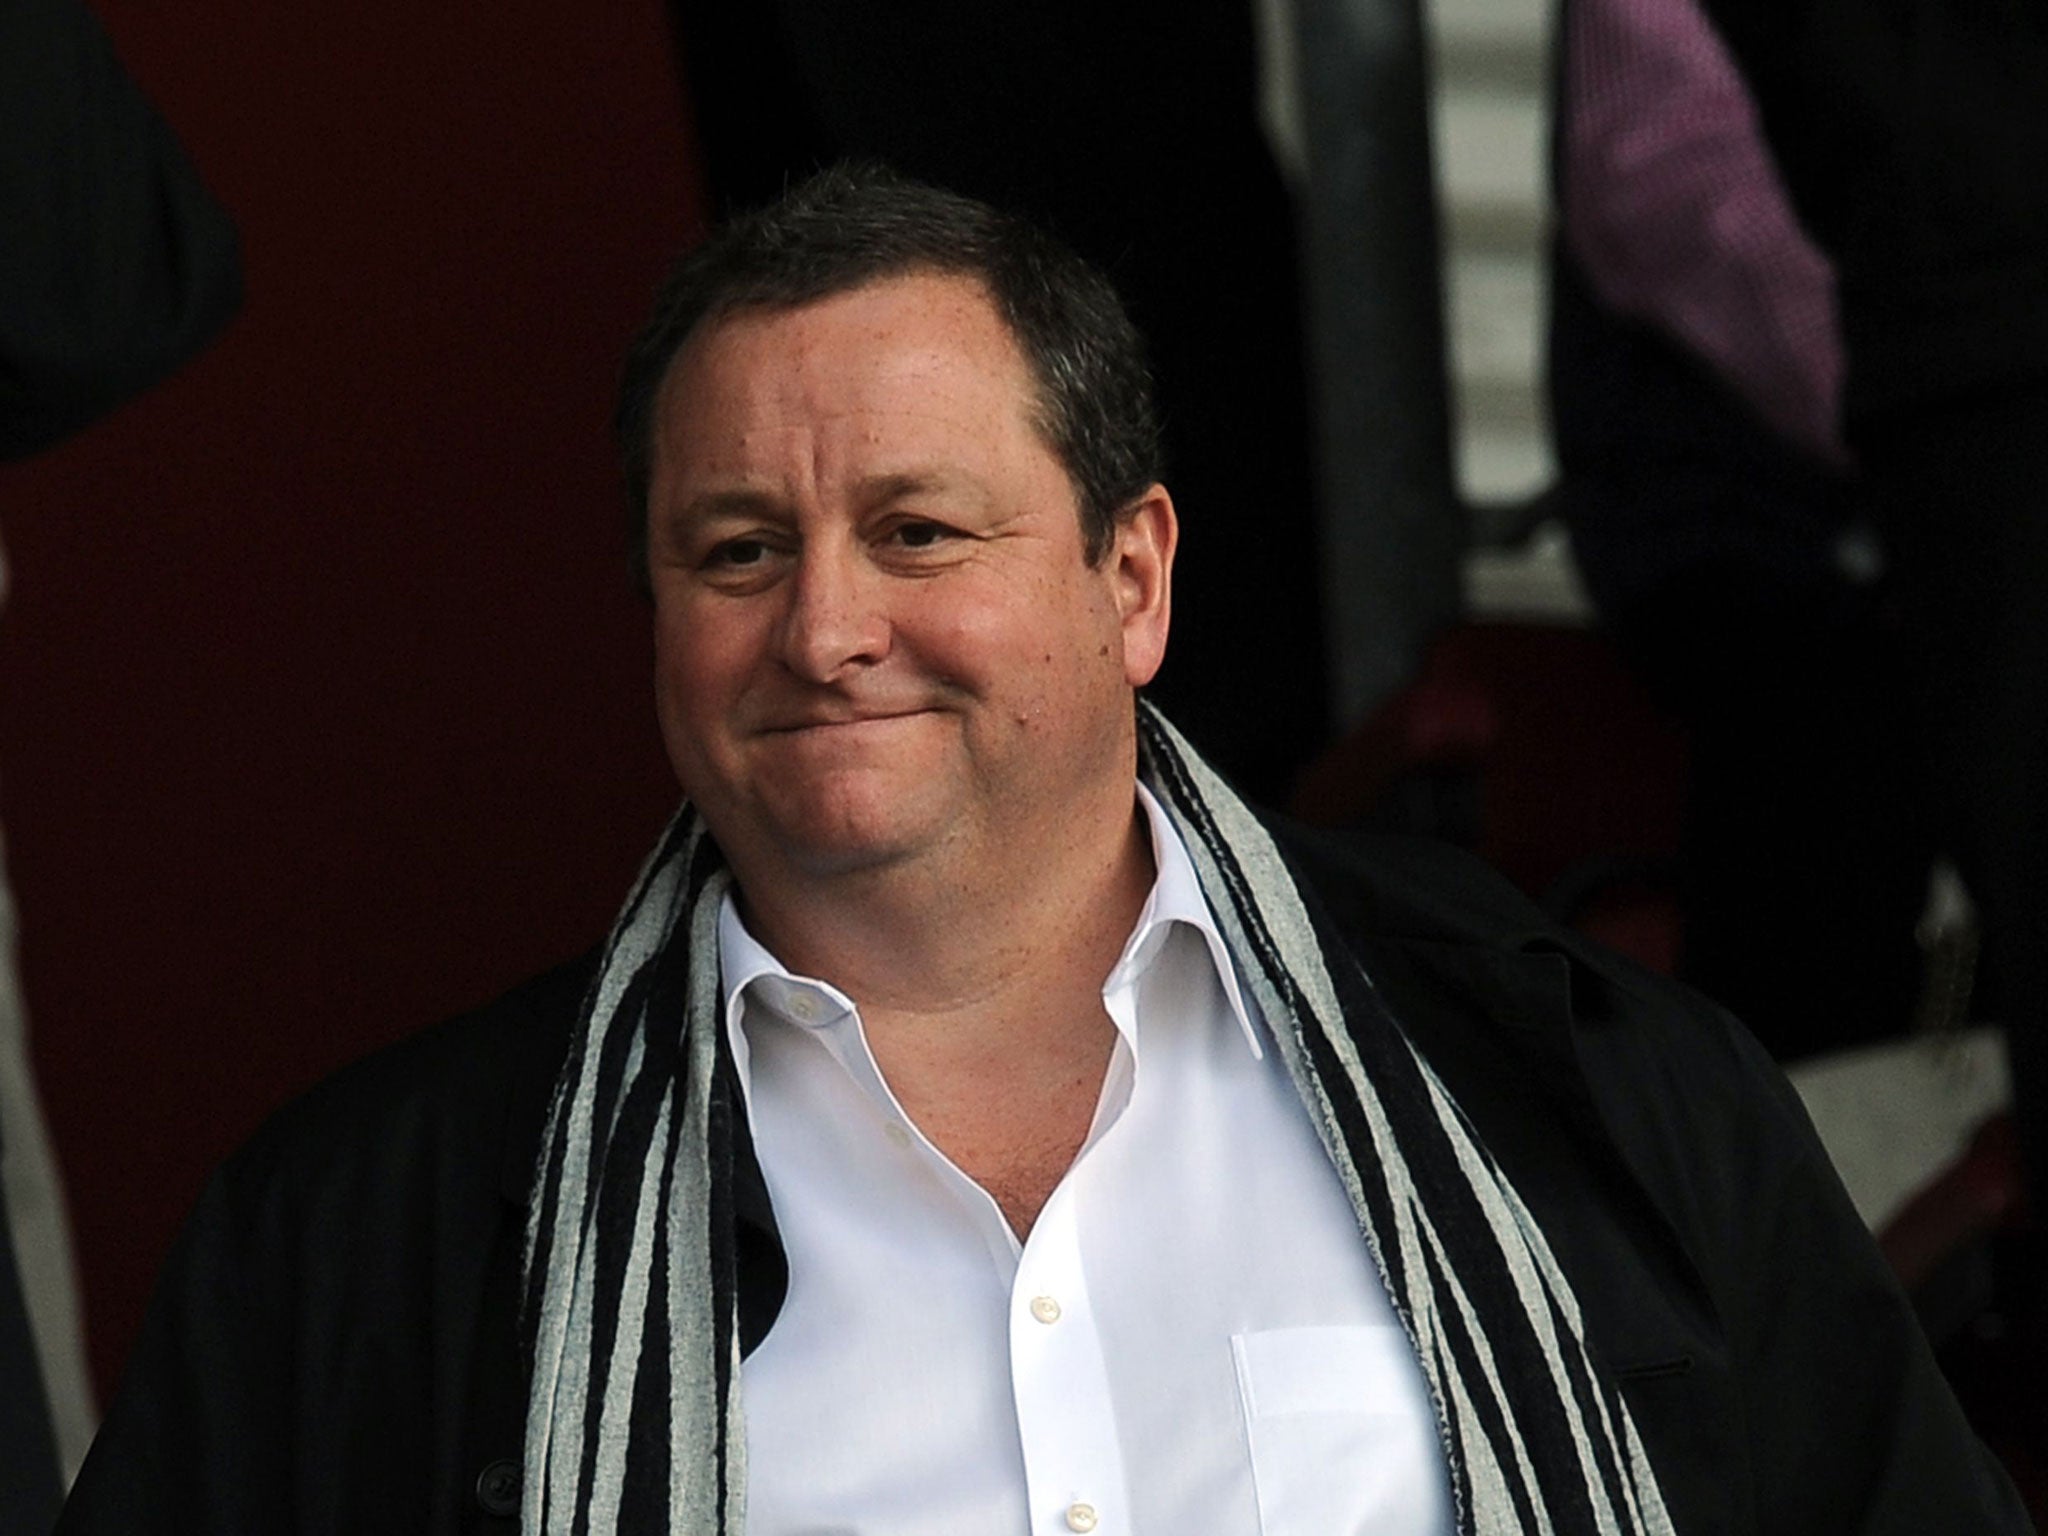 Newcastle owner Mike Ashley